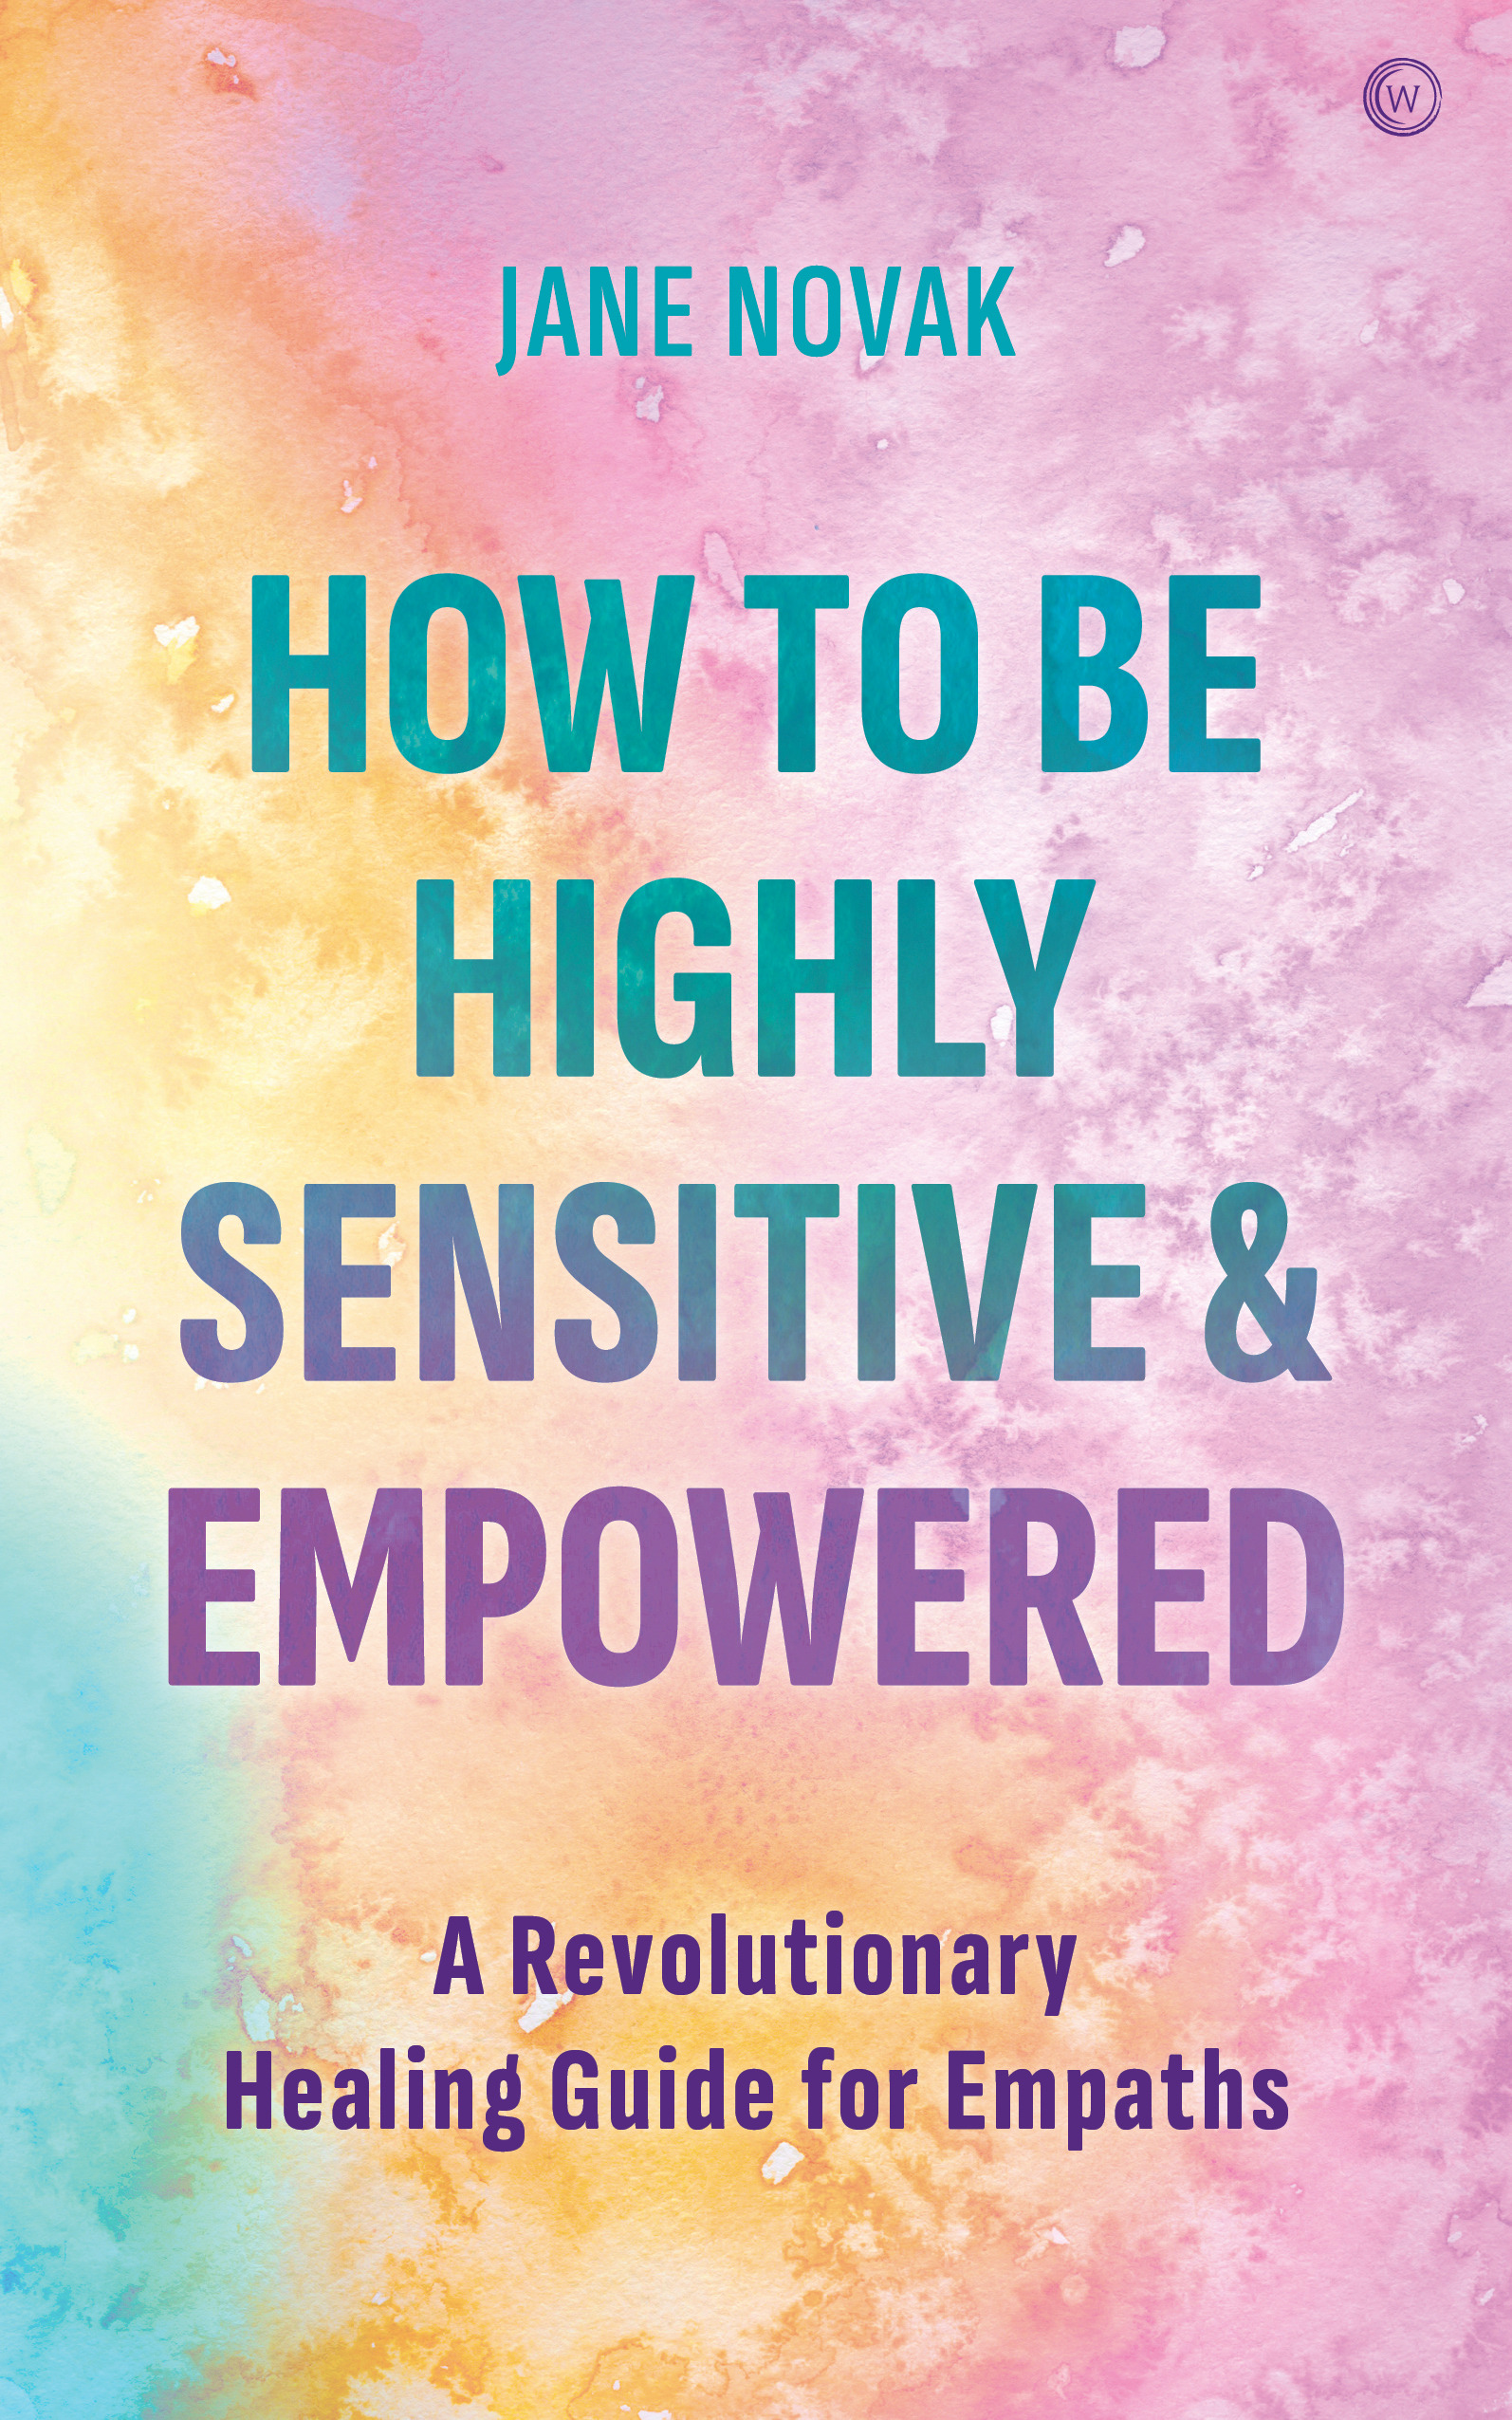 How To Be Highly Sensitive and Empowered : A Revolutionary Healing Guide for Empaths | Psychology & Self-Improvement